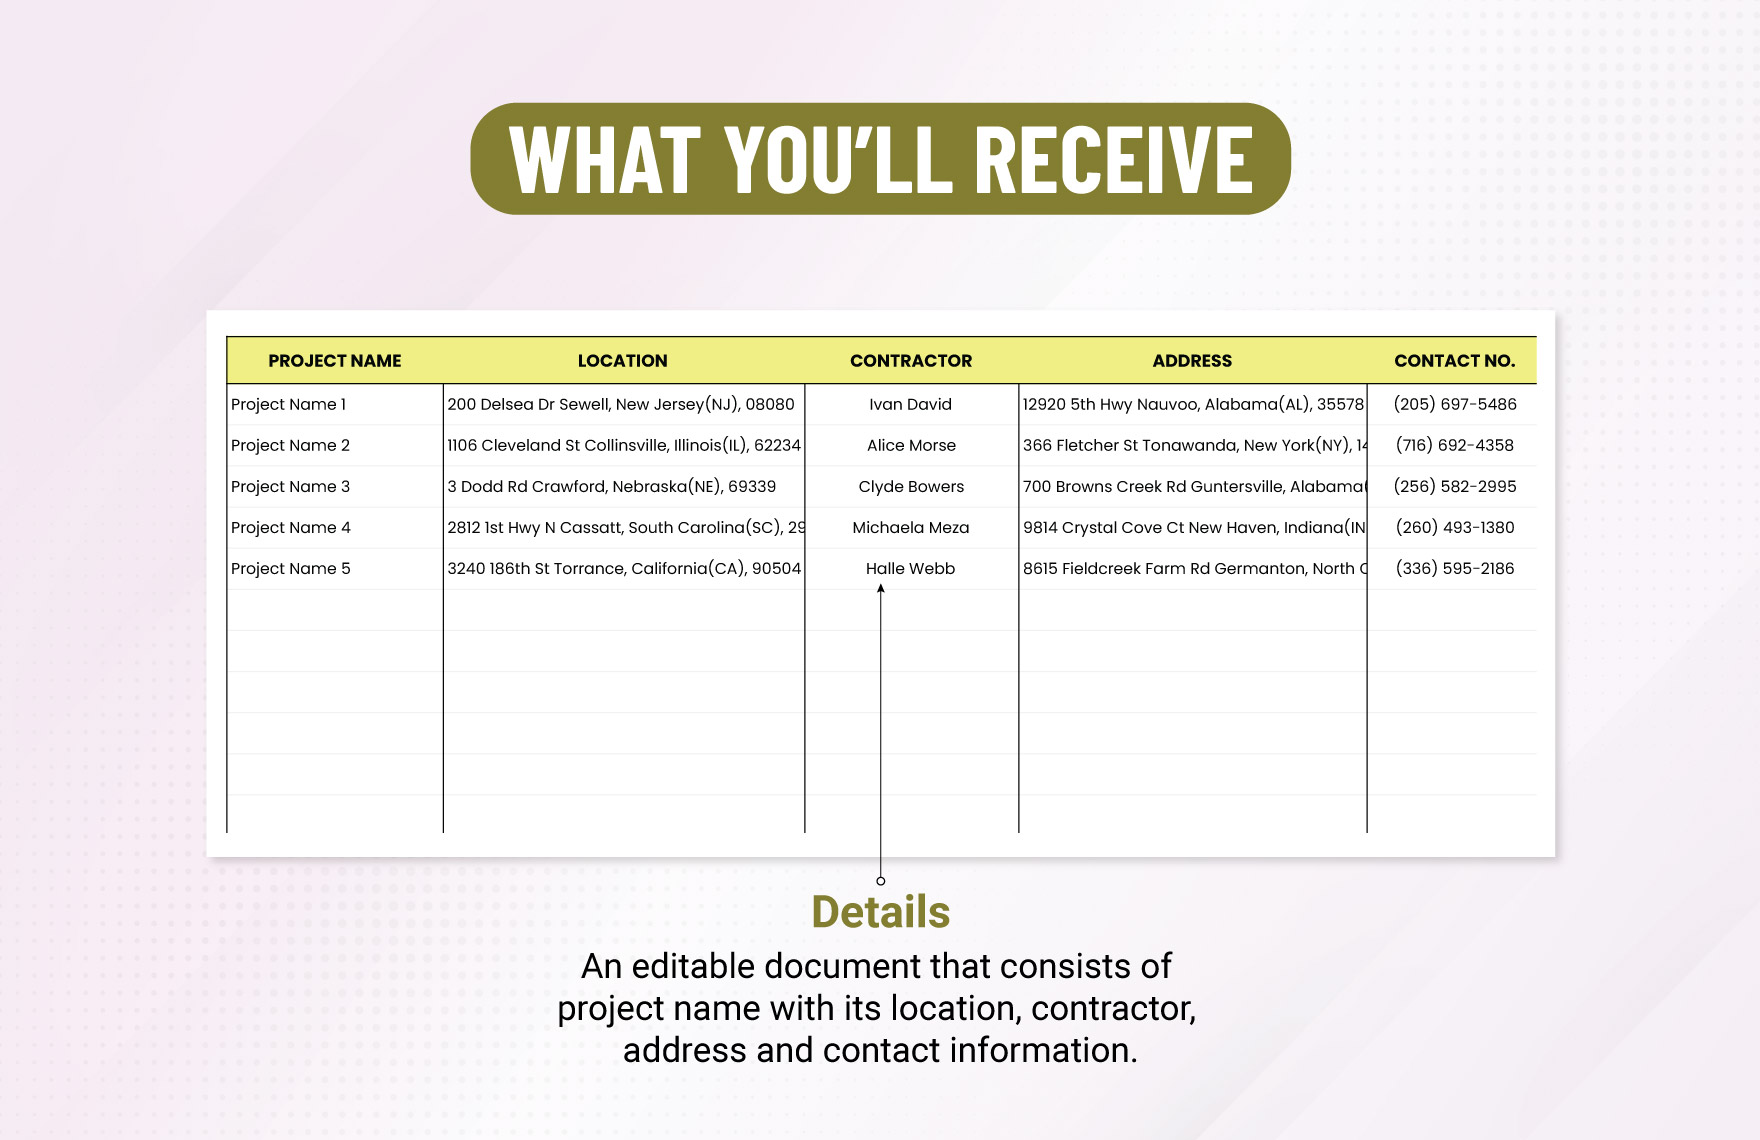 Construction Contract Change Orders Template